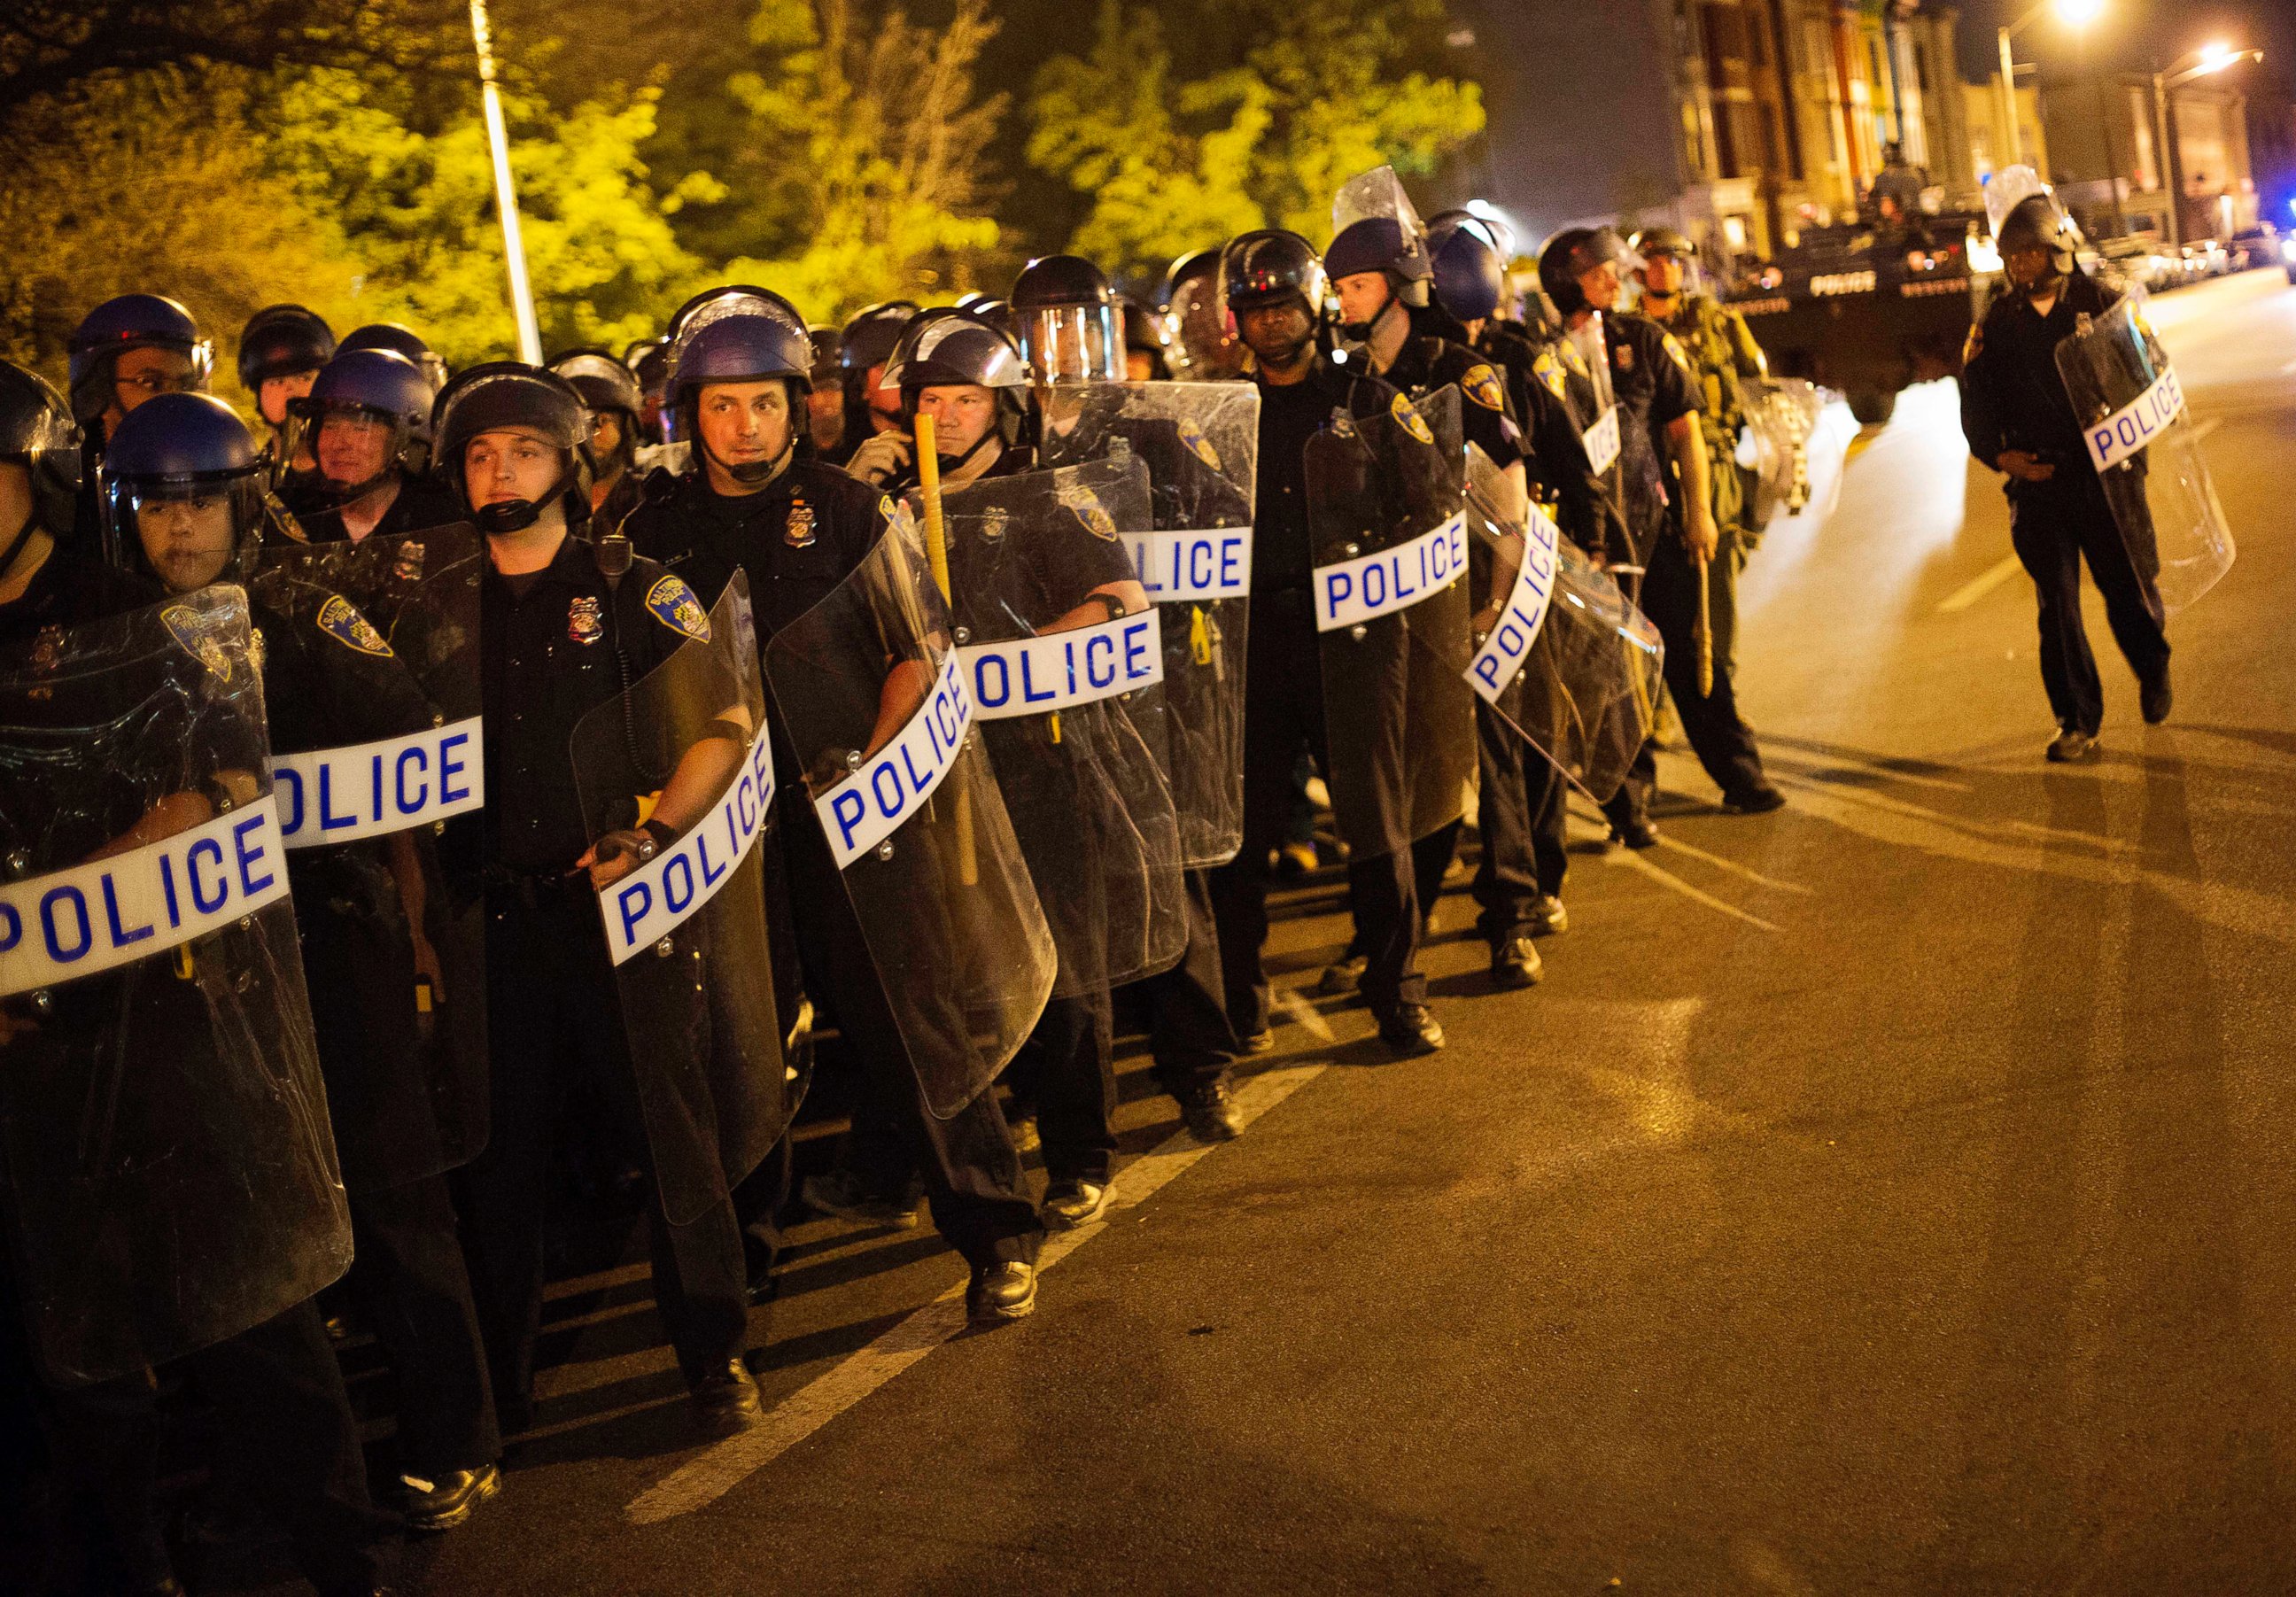 PHOTO: Police in riot gear line up near the scene of Monday's riots ahead of a 10 p.m. curfew, April 29, 2015, in Baltimore.